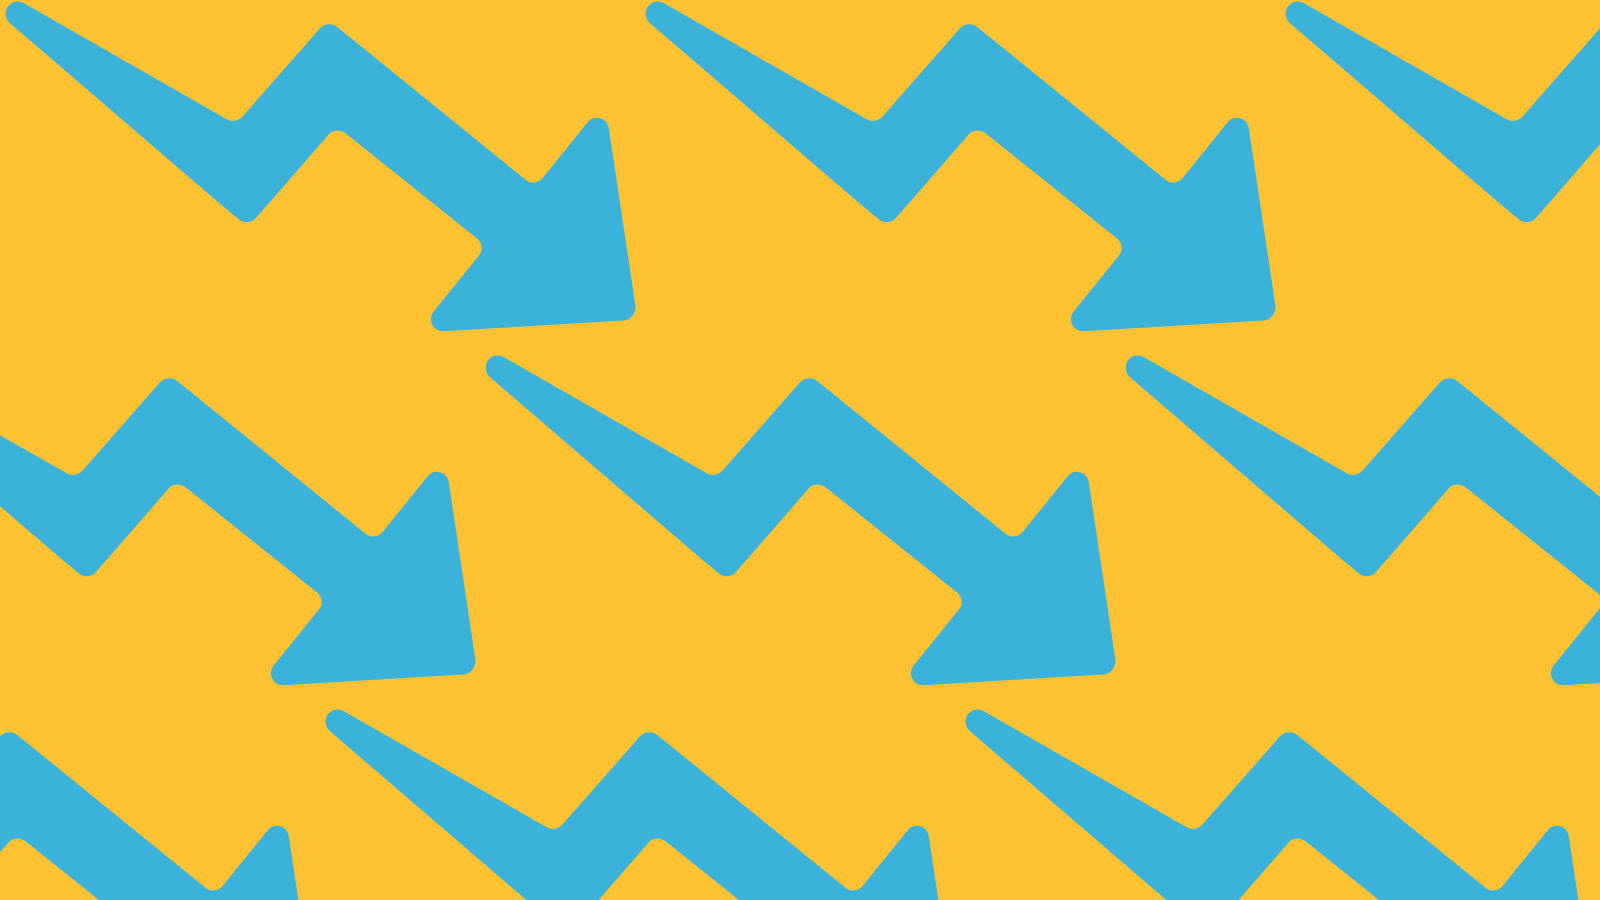 A repeating pattern of jagged arrows pointing to the bottom right